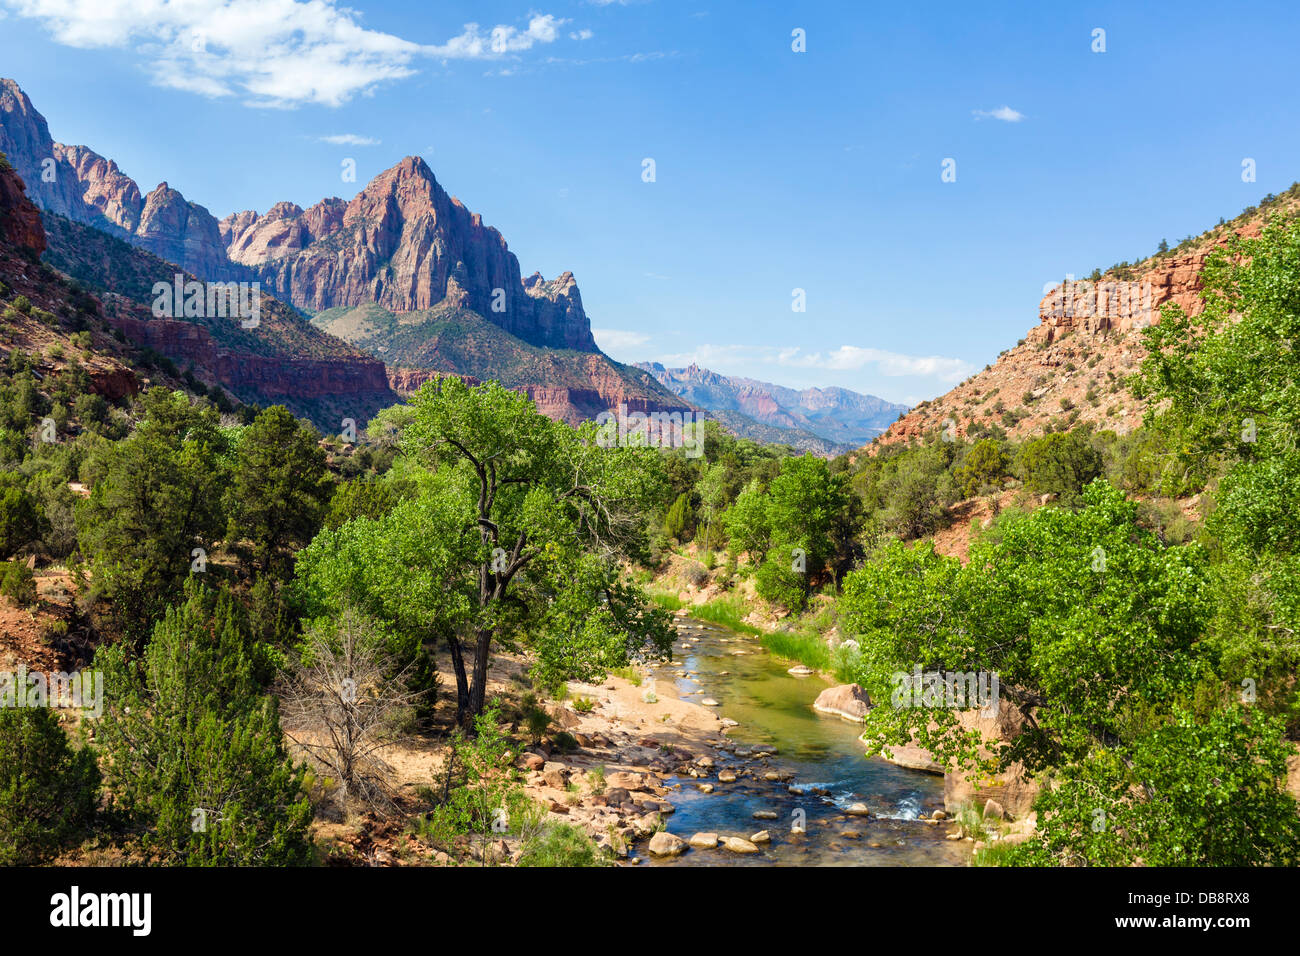 Virgin River looking towards The Watchman peak, viewed from a bridge on the Zion-Mount Carmel Highway (SR 9), Zion National Park, Utah, USA Stock Photo